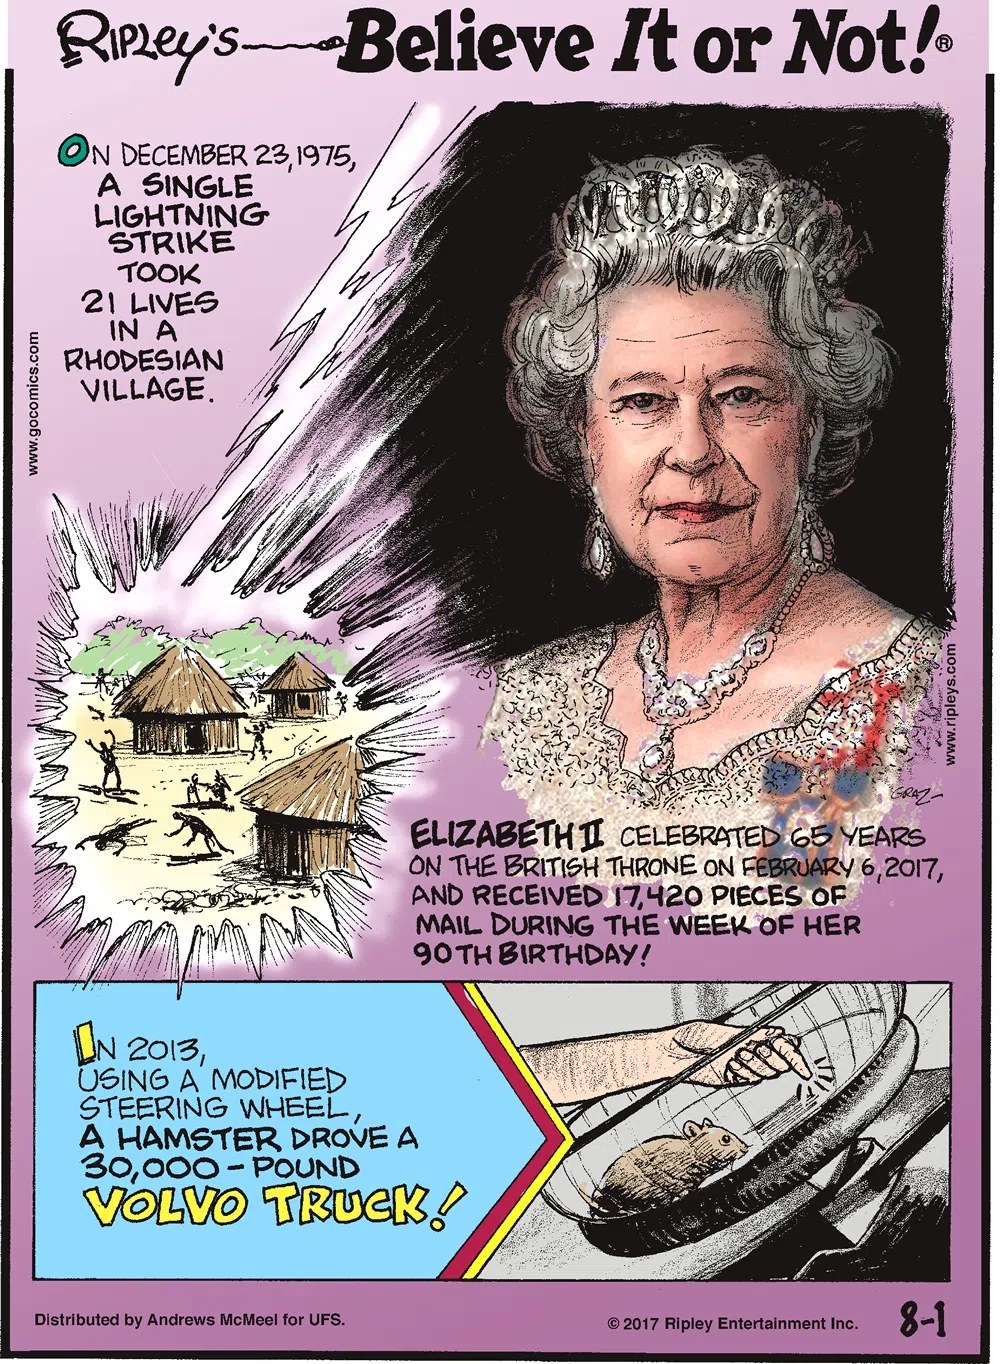 On December 23, 1975, a single lightning strike took 21 lives in a Rhodesian Village.-------------------- Elizabeth II celebrated 65 years on the British Throne on February 6, 2017, and received 17,420 pieces of mail during the week of her 90th birthday!-------------------- In 2013, using a modified steering wheel, a hamster drove a 30,000-pound Volvo truck!